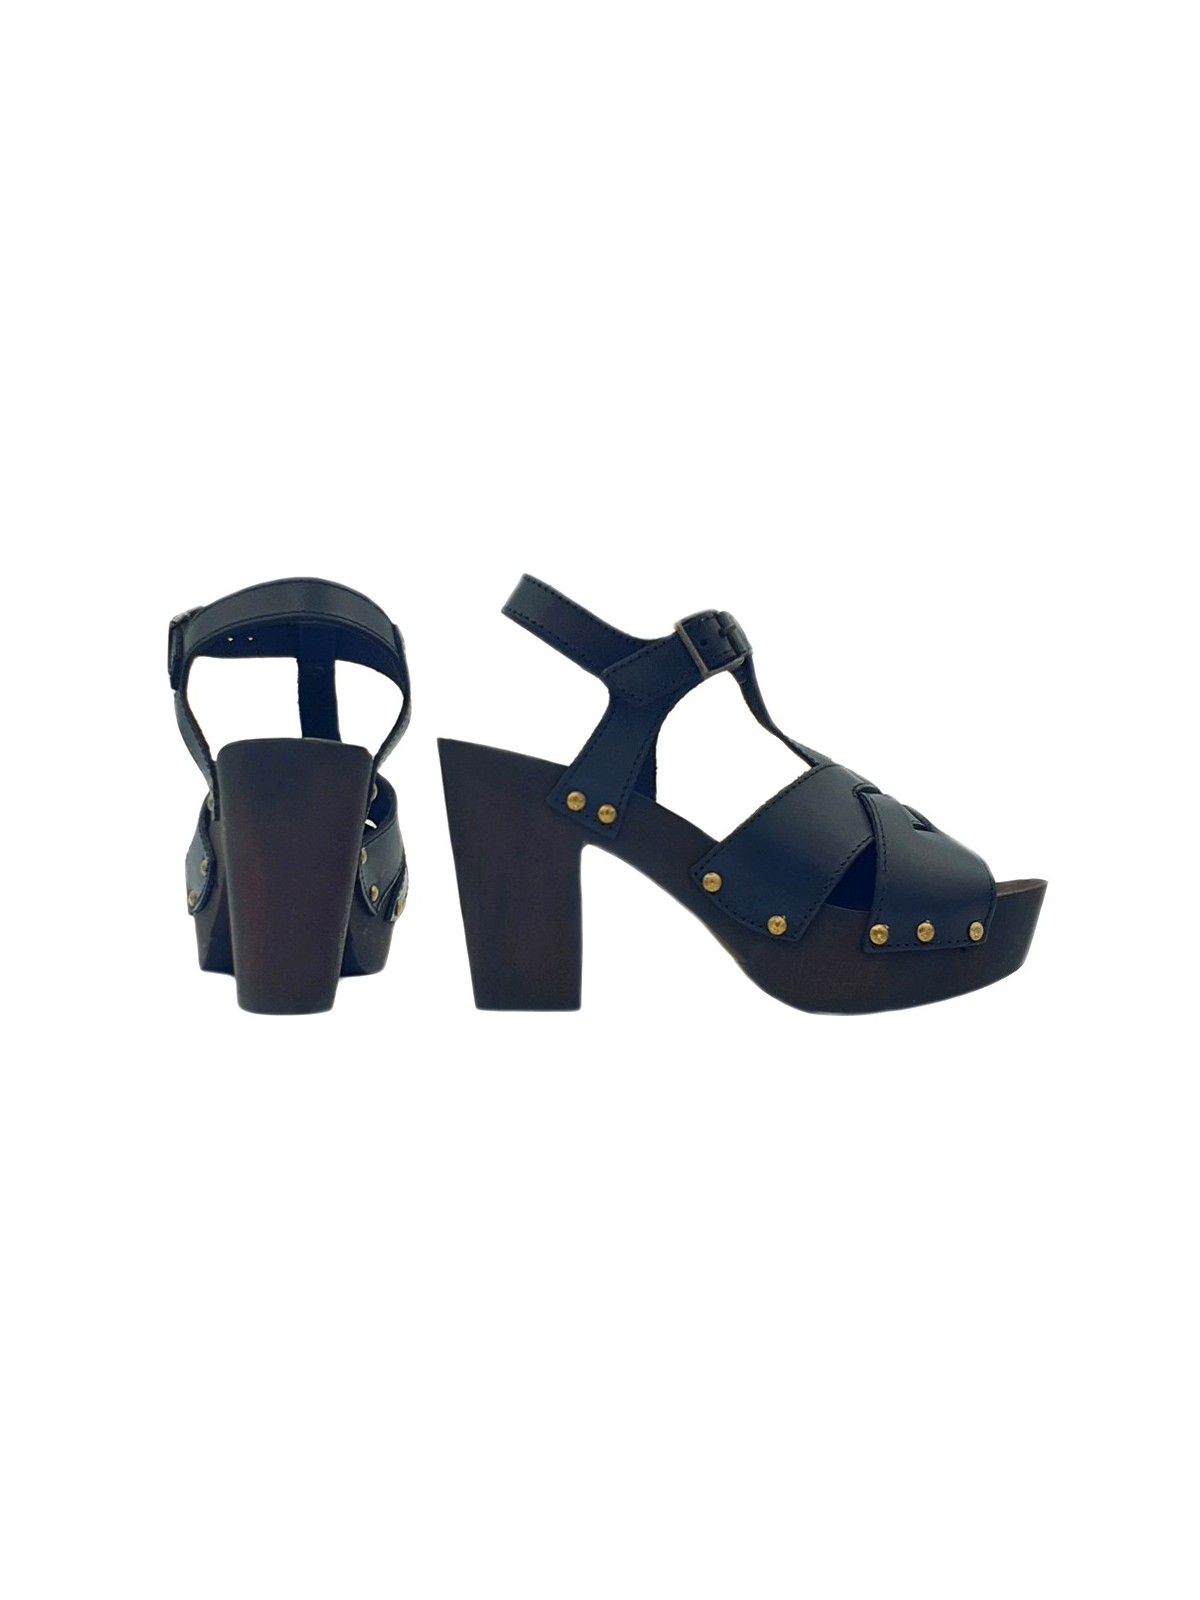 BLACK CLOGS IN LEATHER AND COMFY HEEL 9